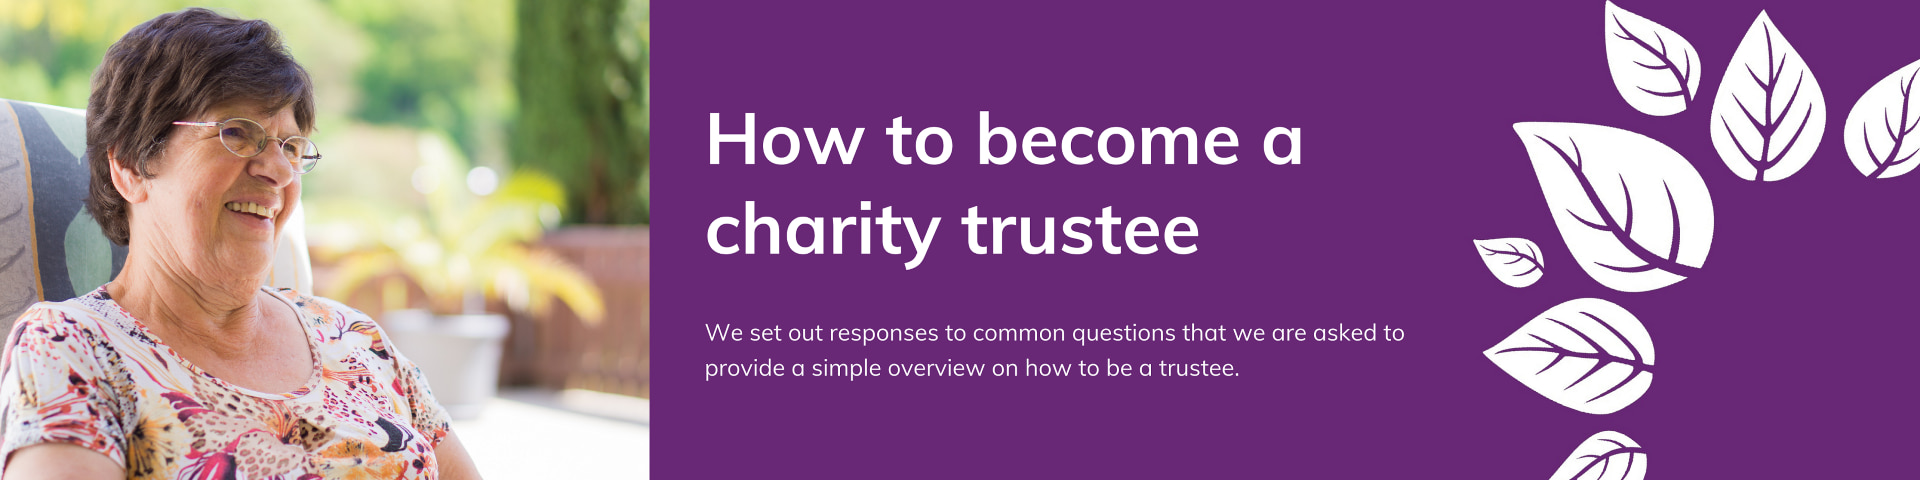 Banner3 - How to become a charity trustee